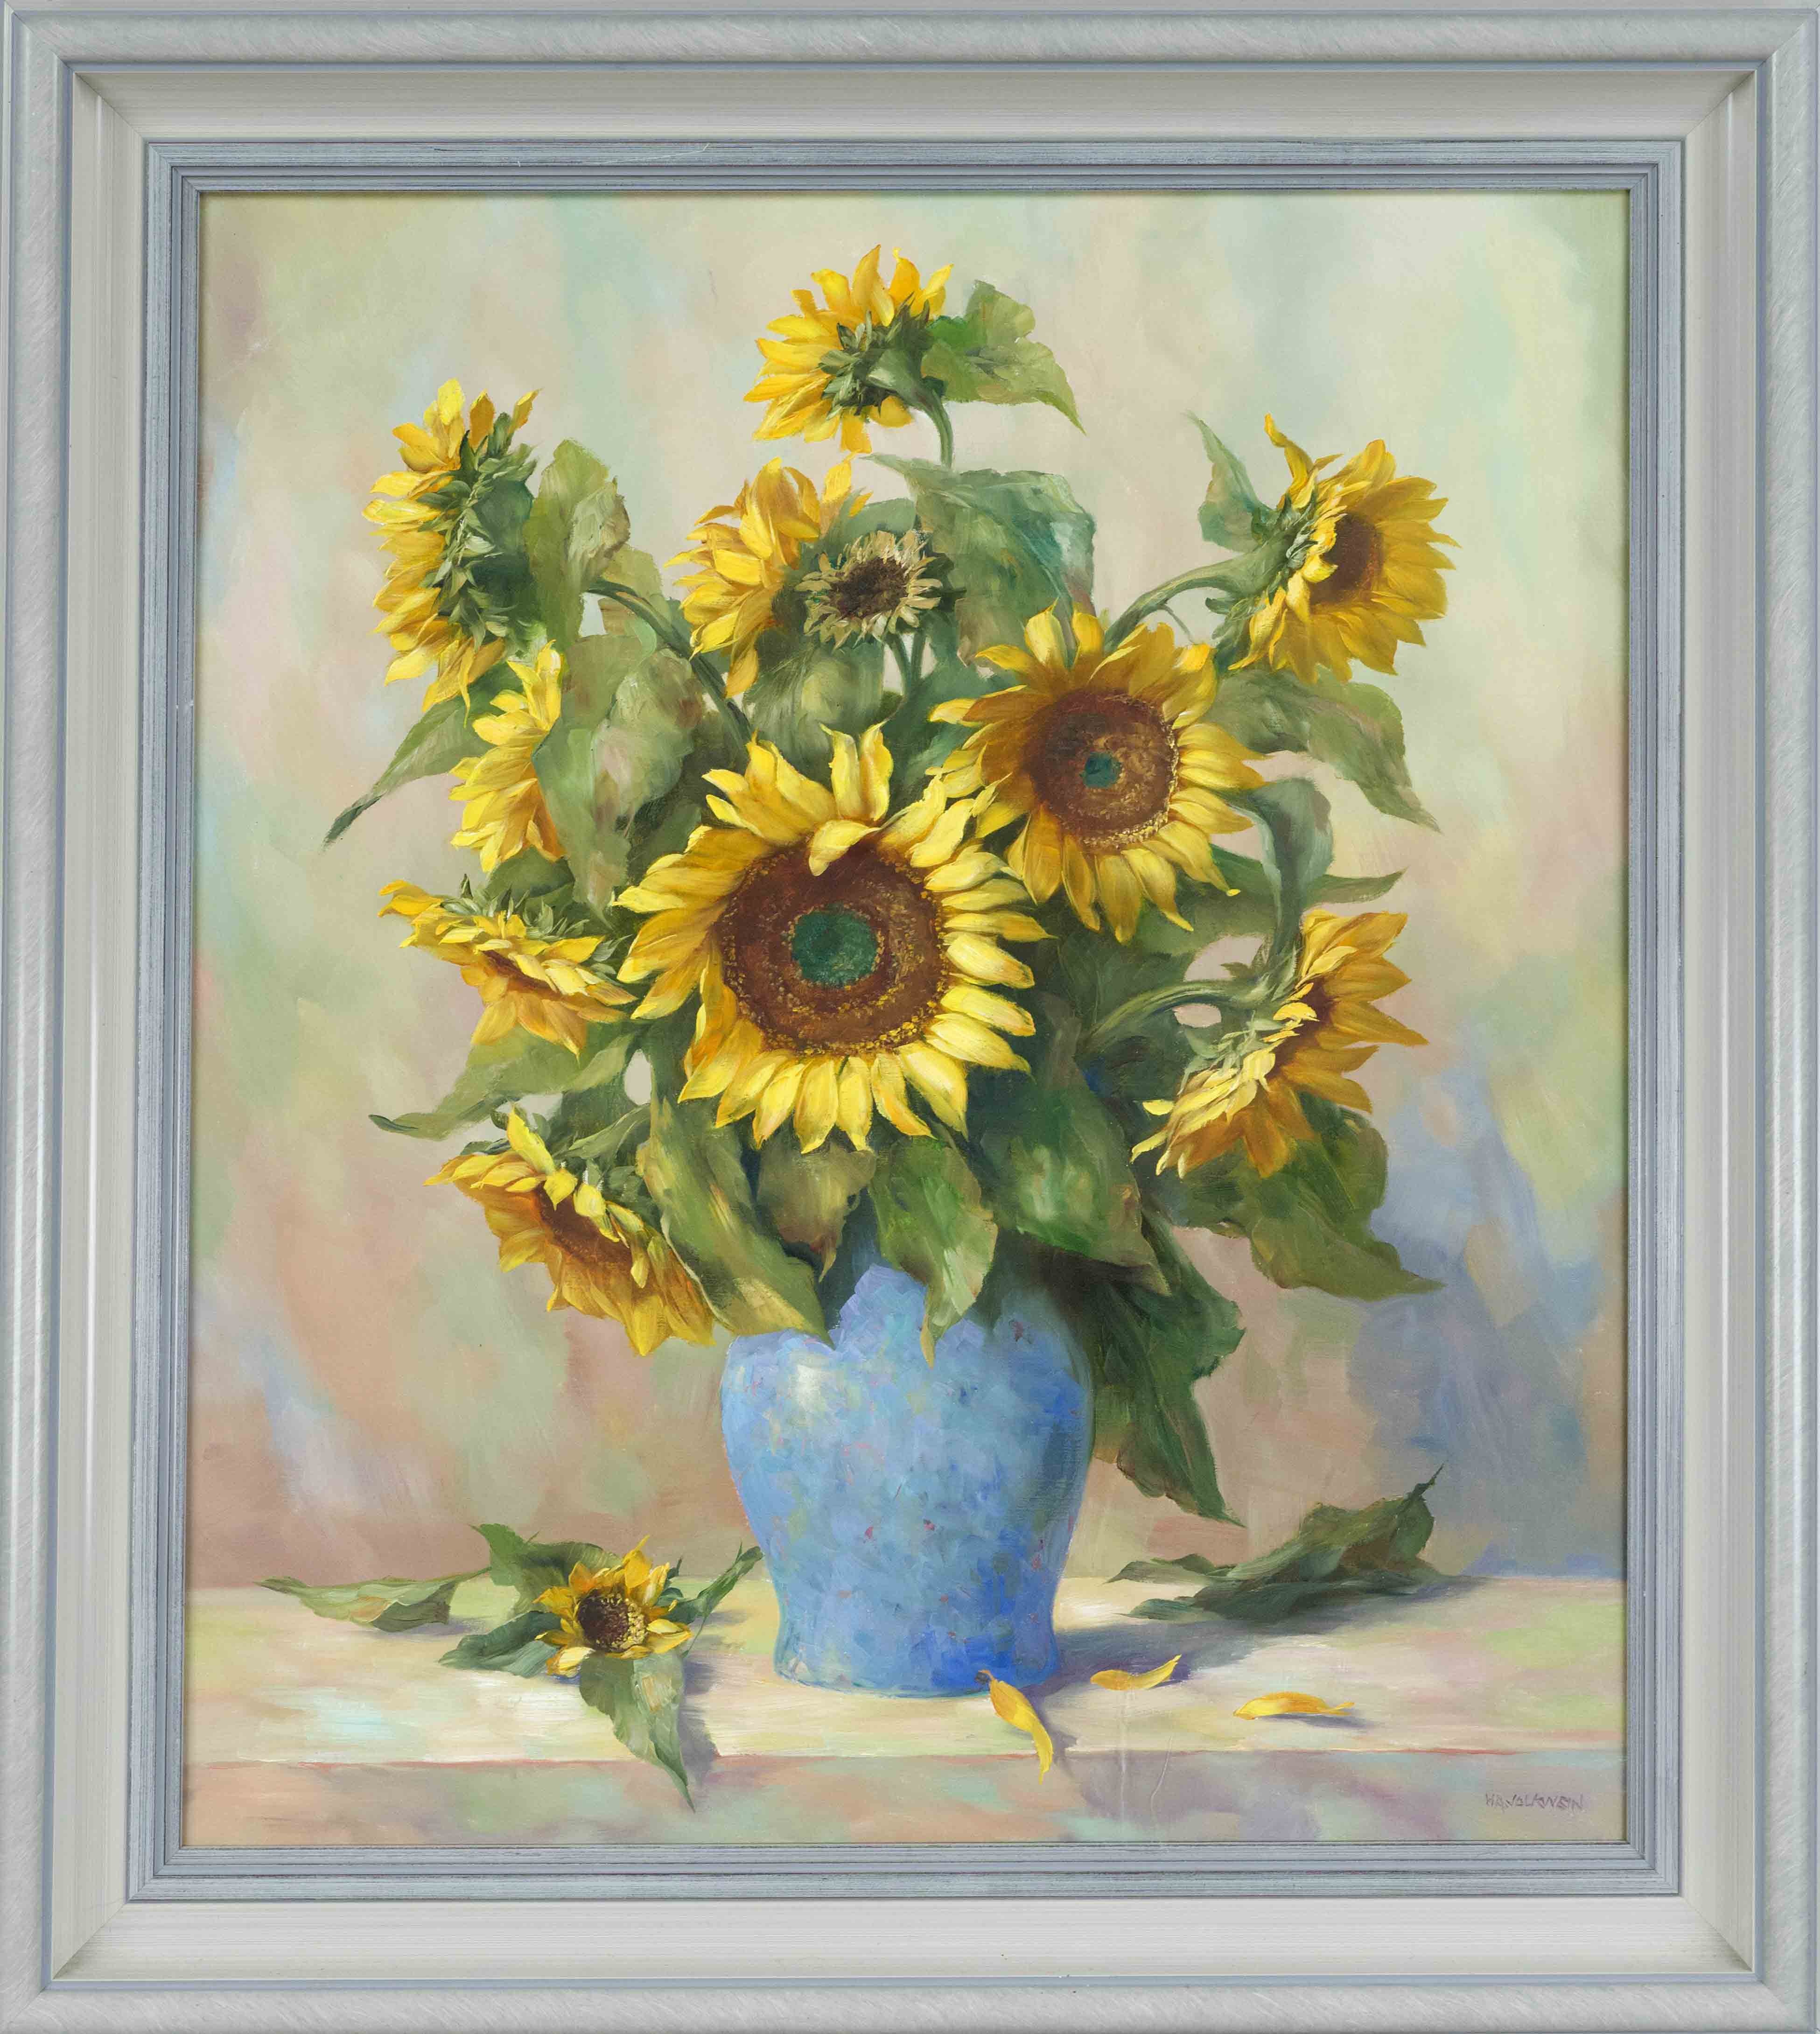 Unidentified painter late 20th century, Sunflowers in a blue vase, oil on canvas, indistinctly